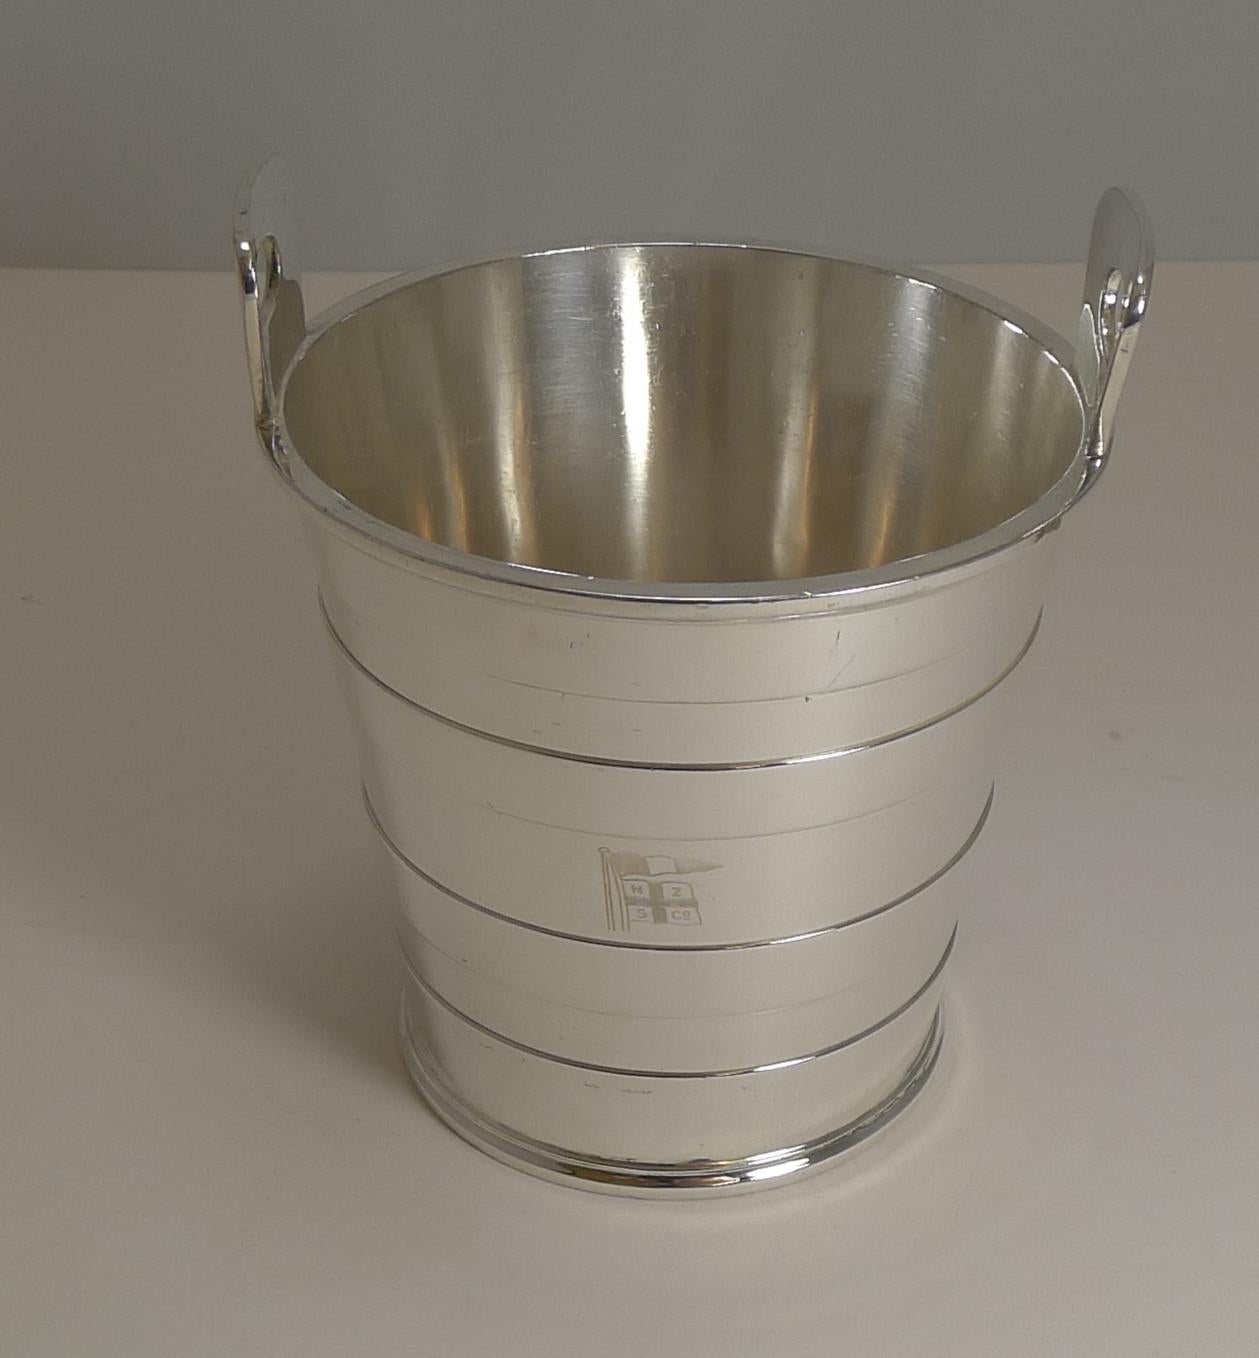 A handsome antique English ice bucket in the form of a bucket or pail, made from silver plate by the top notch silversmith, Mappin and Webb; the underside is fully marked for the silversmith.

The inside has a drainer which sits on a rim on the